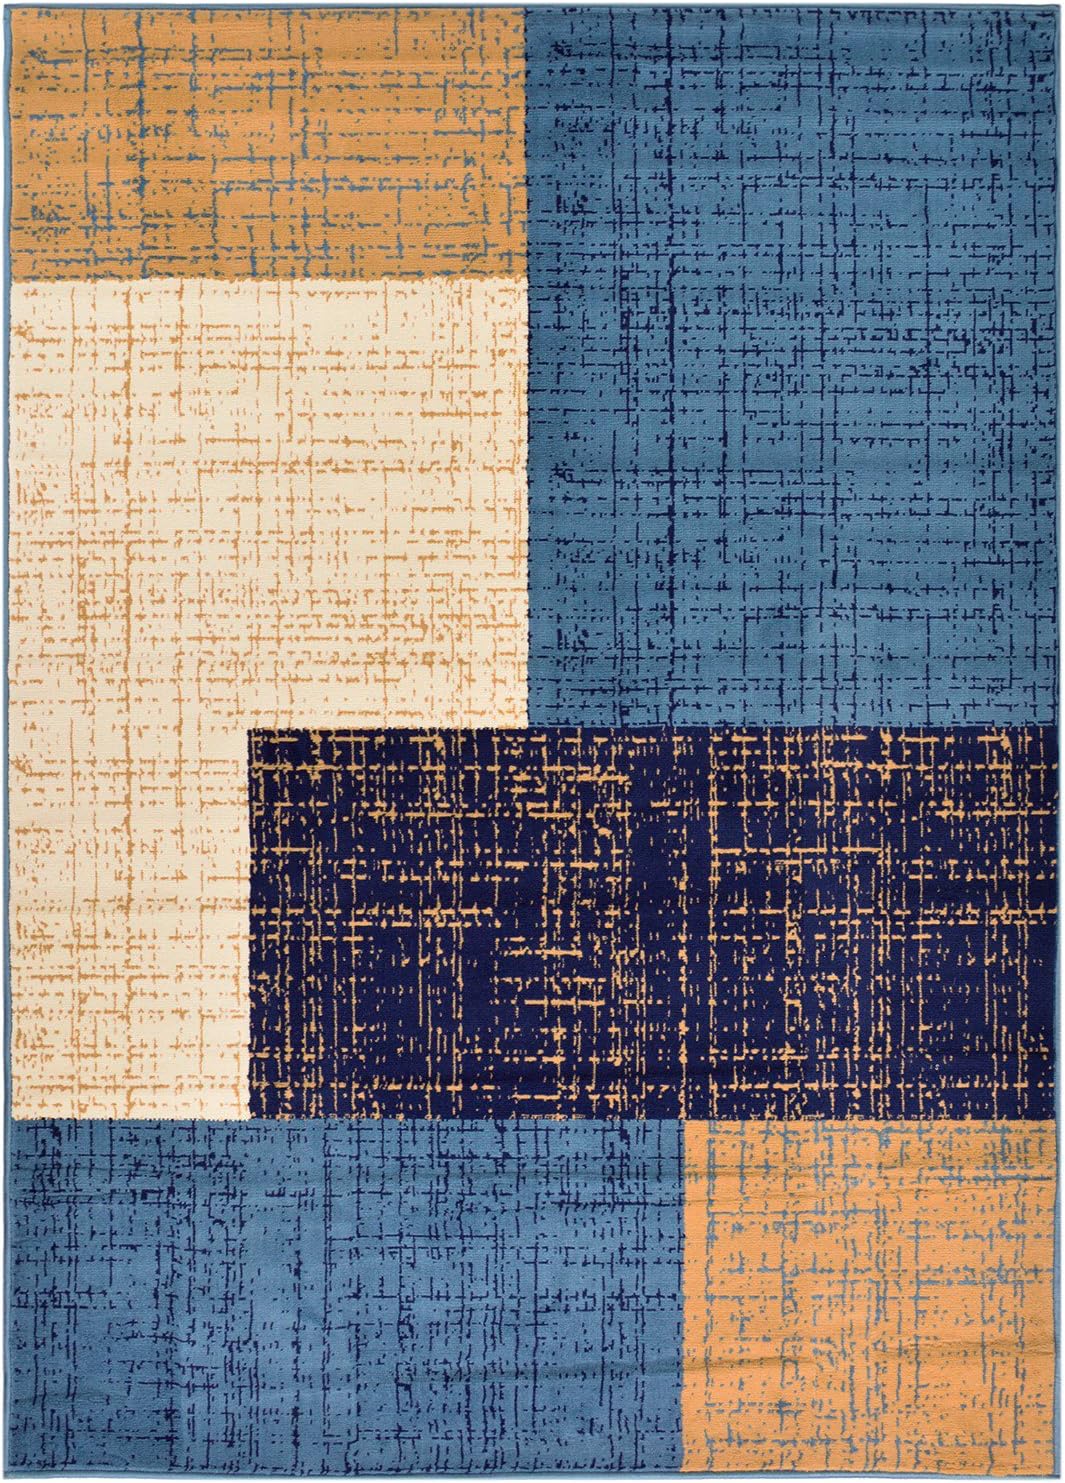 Conur Collection Squares Geometric Abstract Area Rug Rugs Modern Contemporary Area Rug 2 Color Options (Petrol Blue Navy , 4'11" x 6'11")